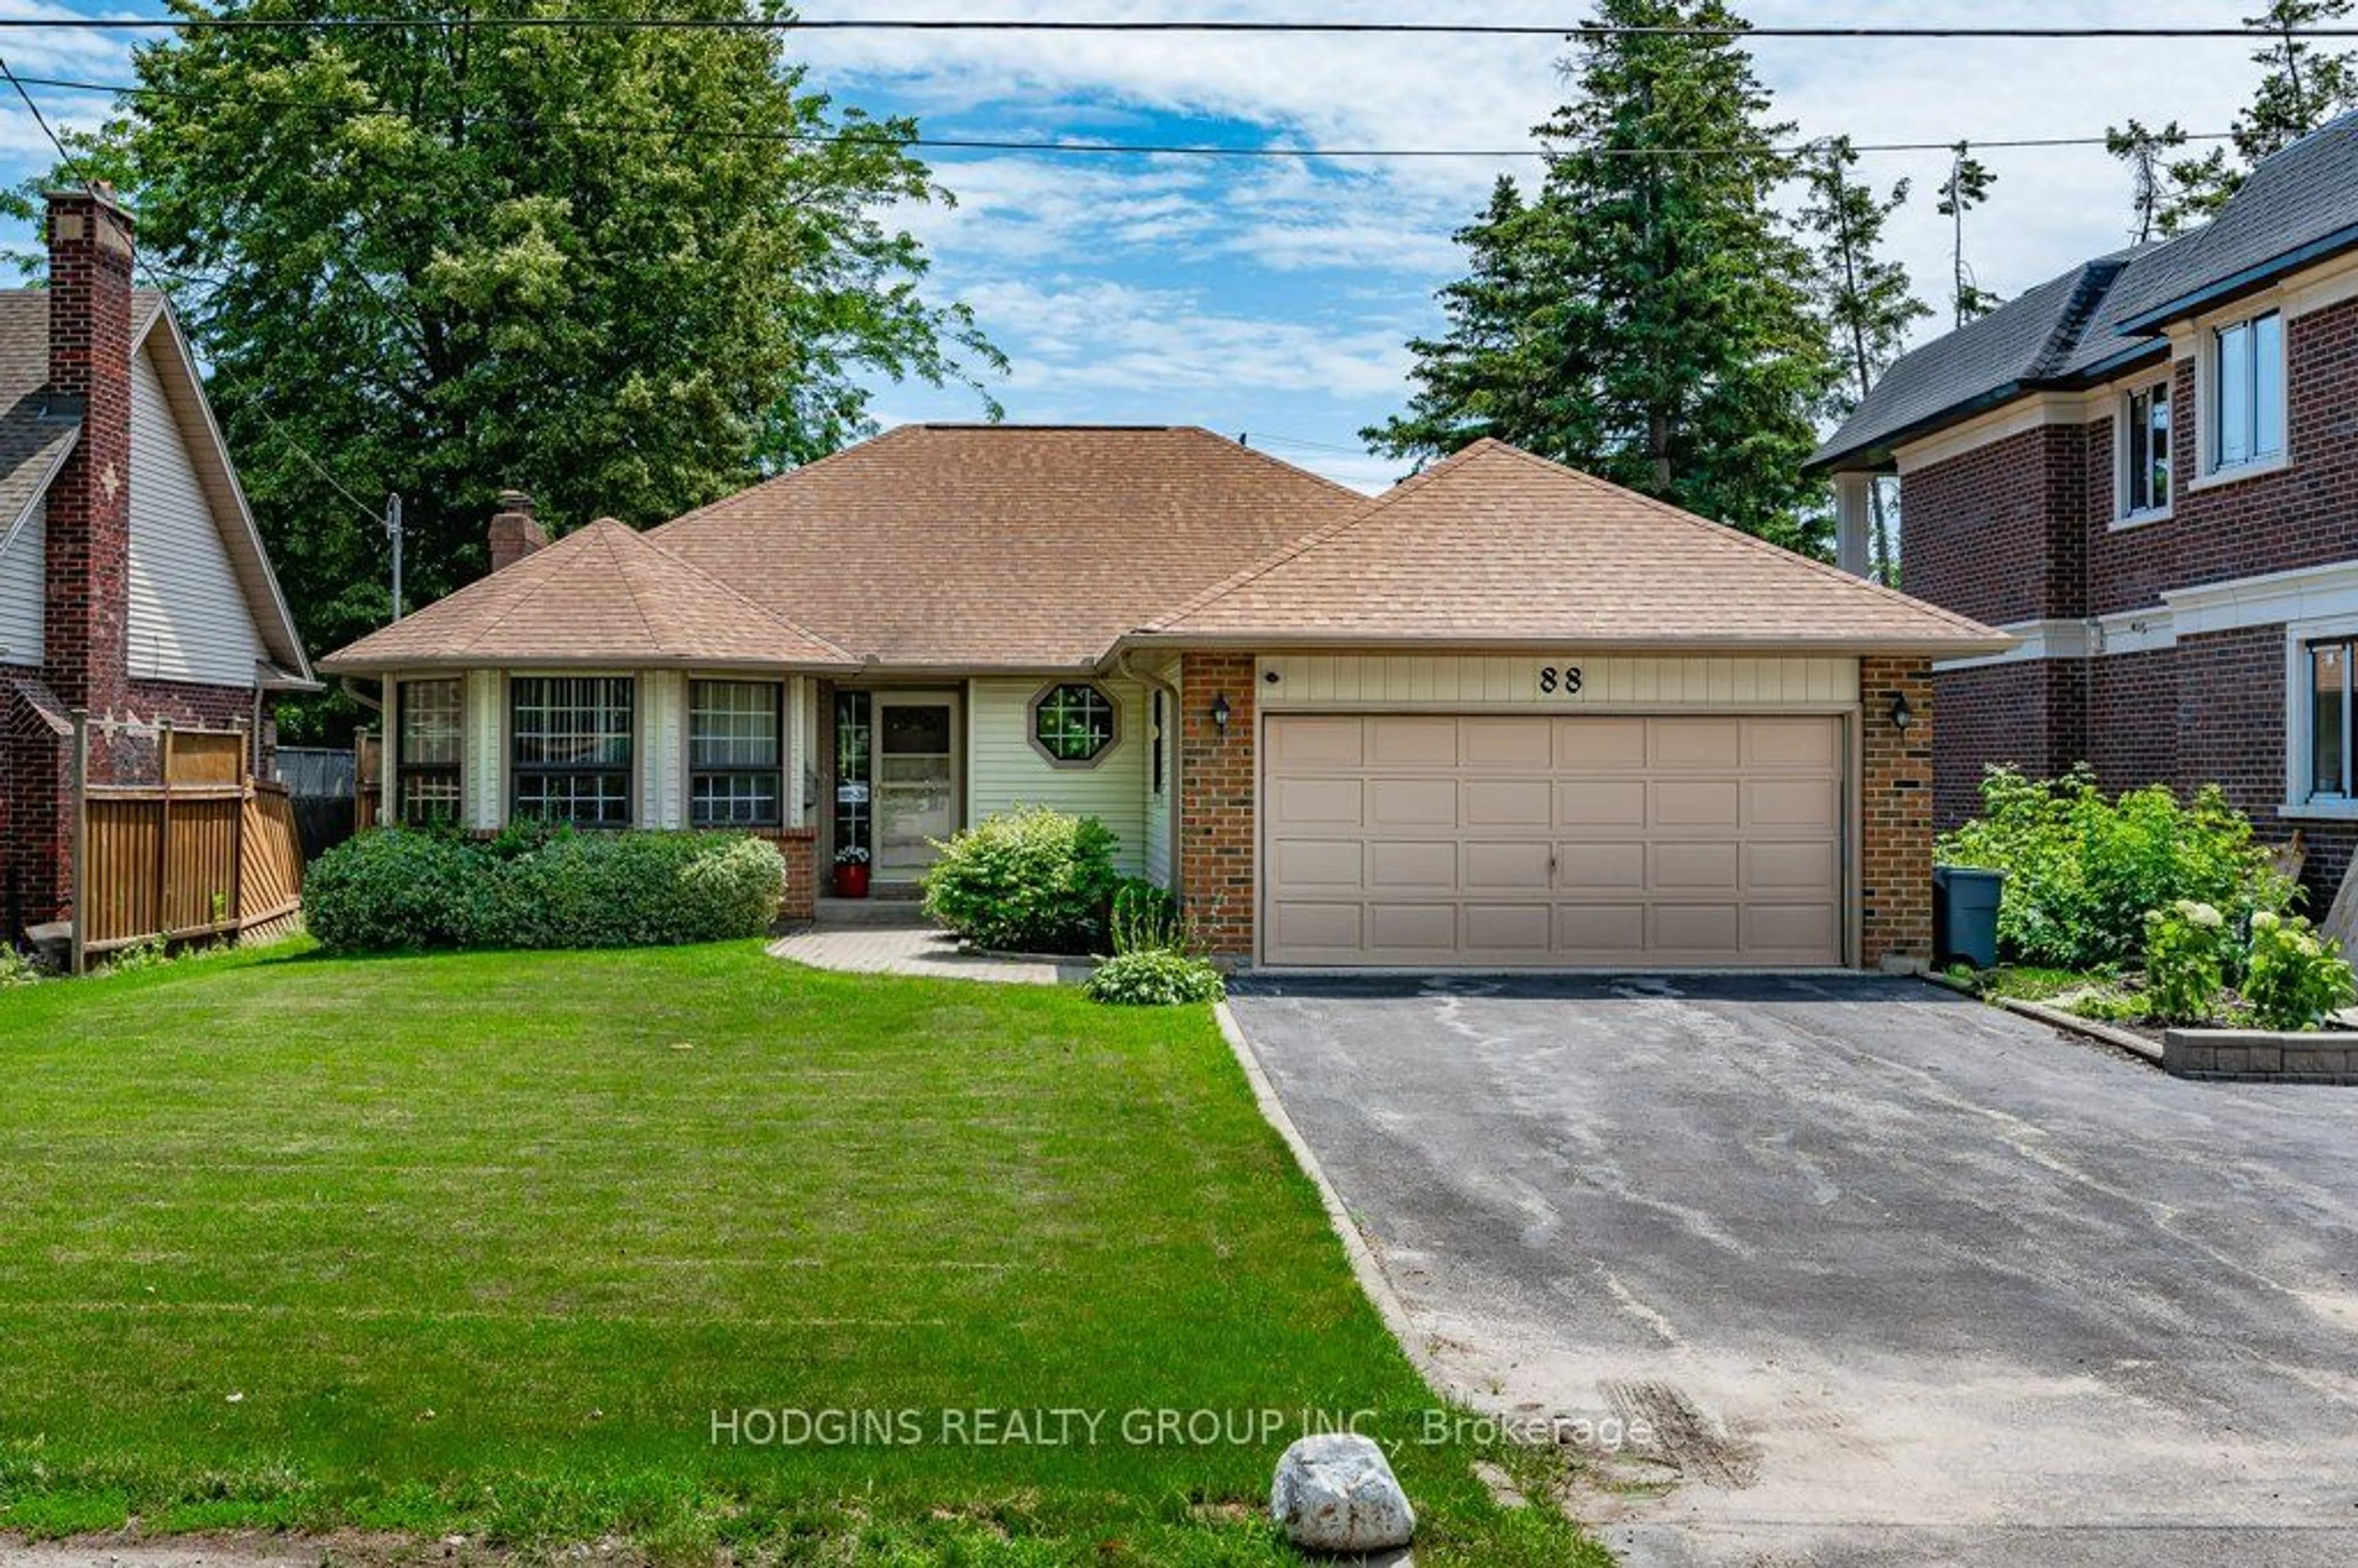 Frontside or backside of a home for 88 Troy St, Mississauga Ontario L5G 1S7